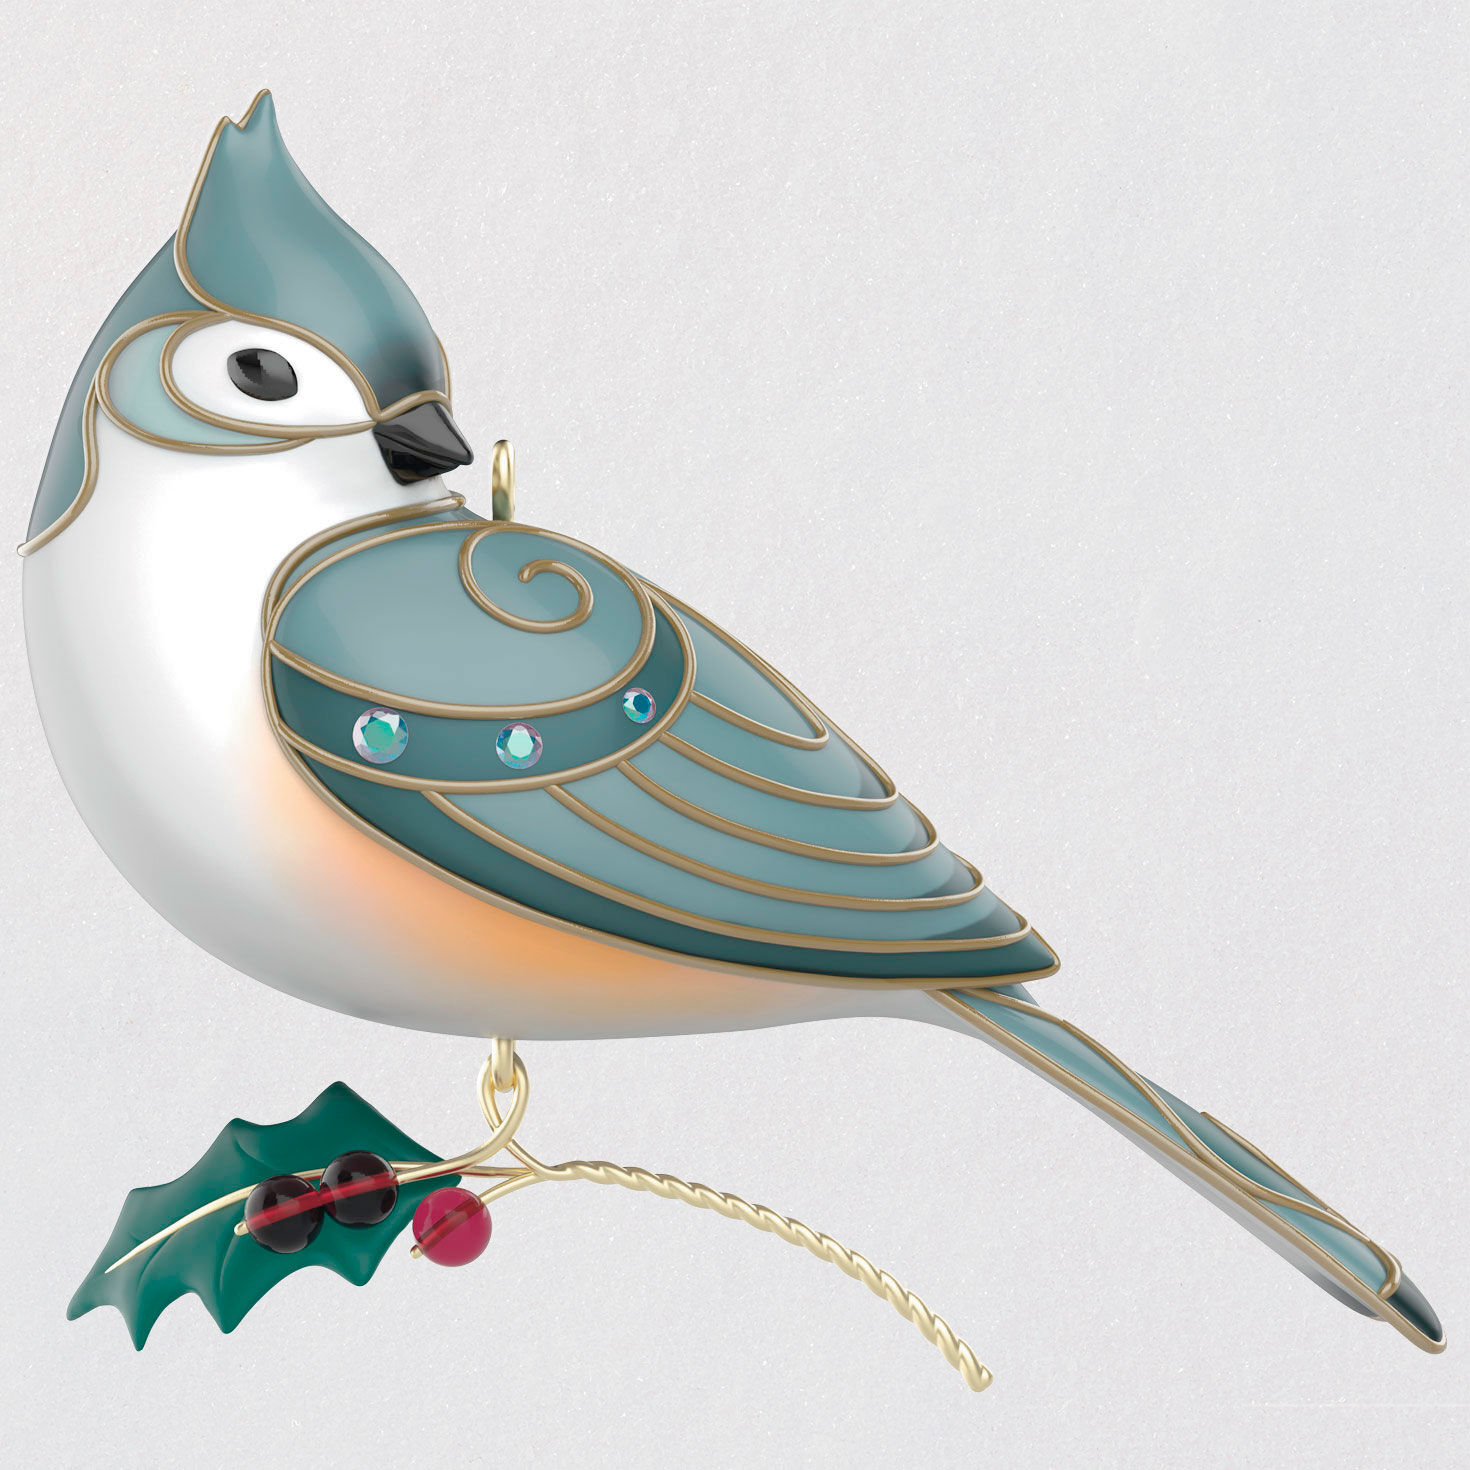 The Beauty of Birds Lady Tufted Titmouse Ornament